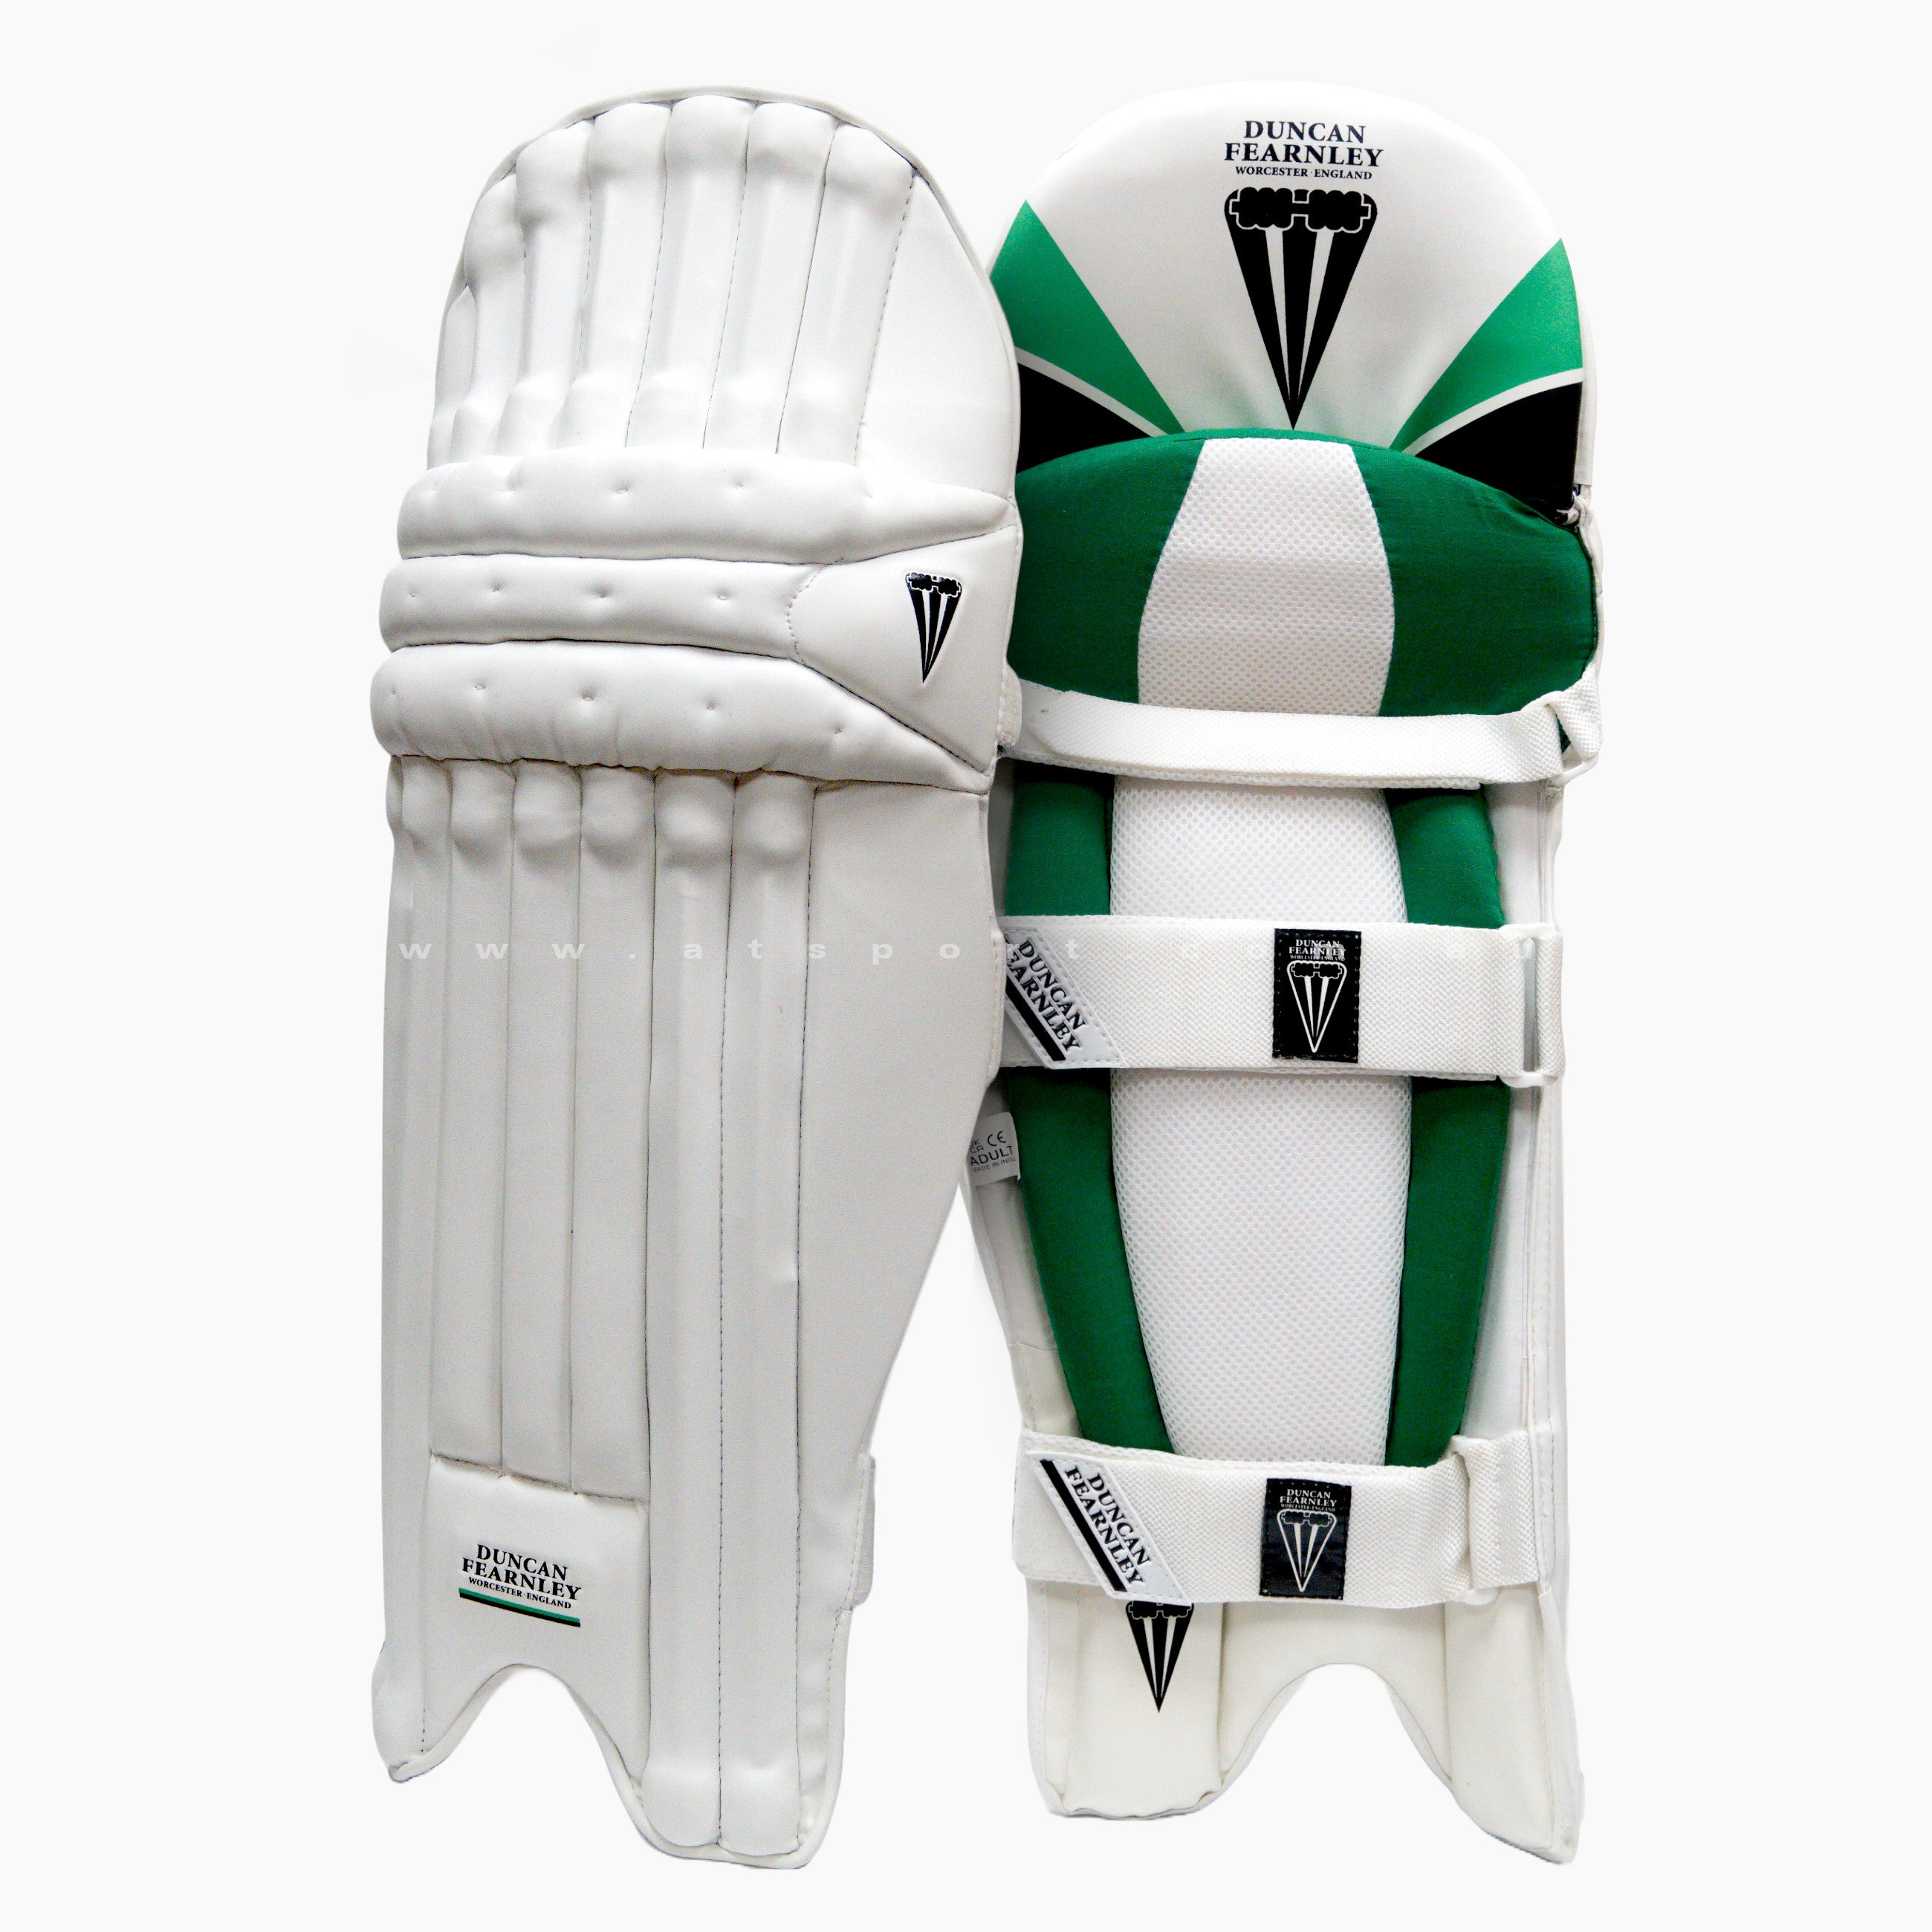 Duncan Fearnley Magnum Cricket Batting Pads - YOUTH